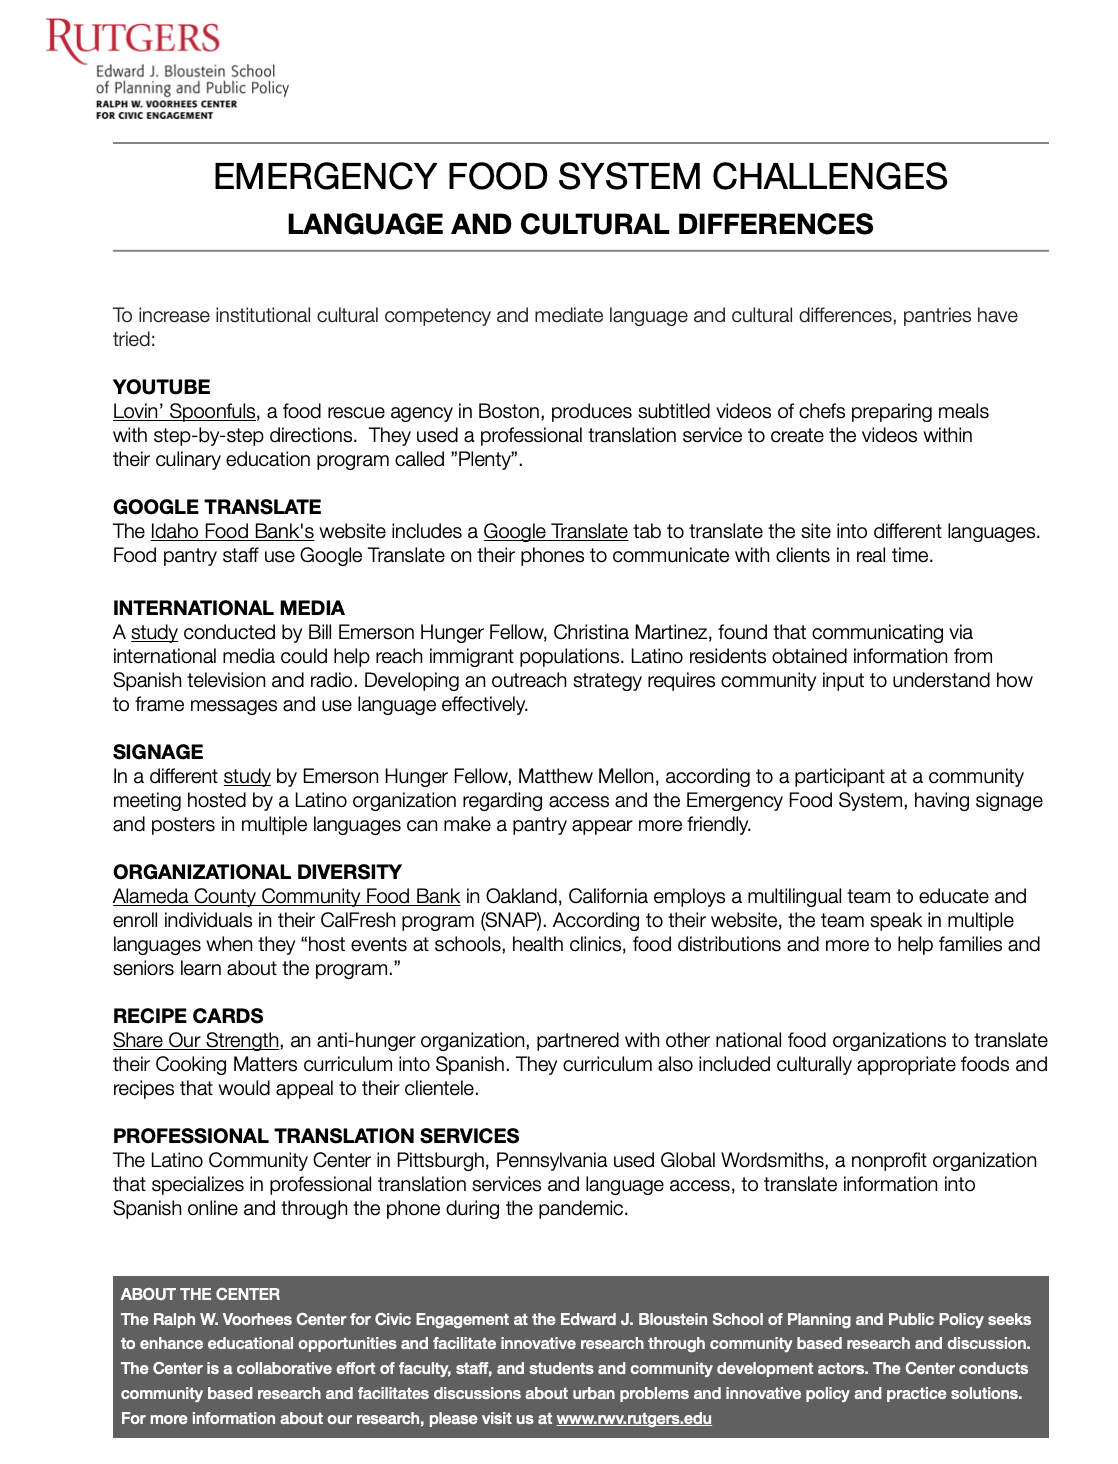 Language and Cultural Differences